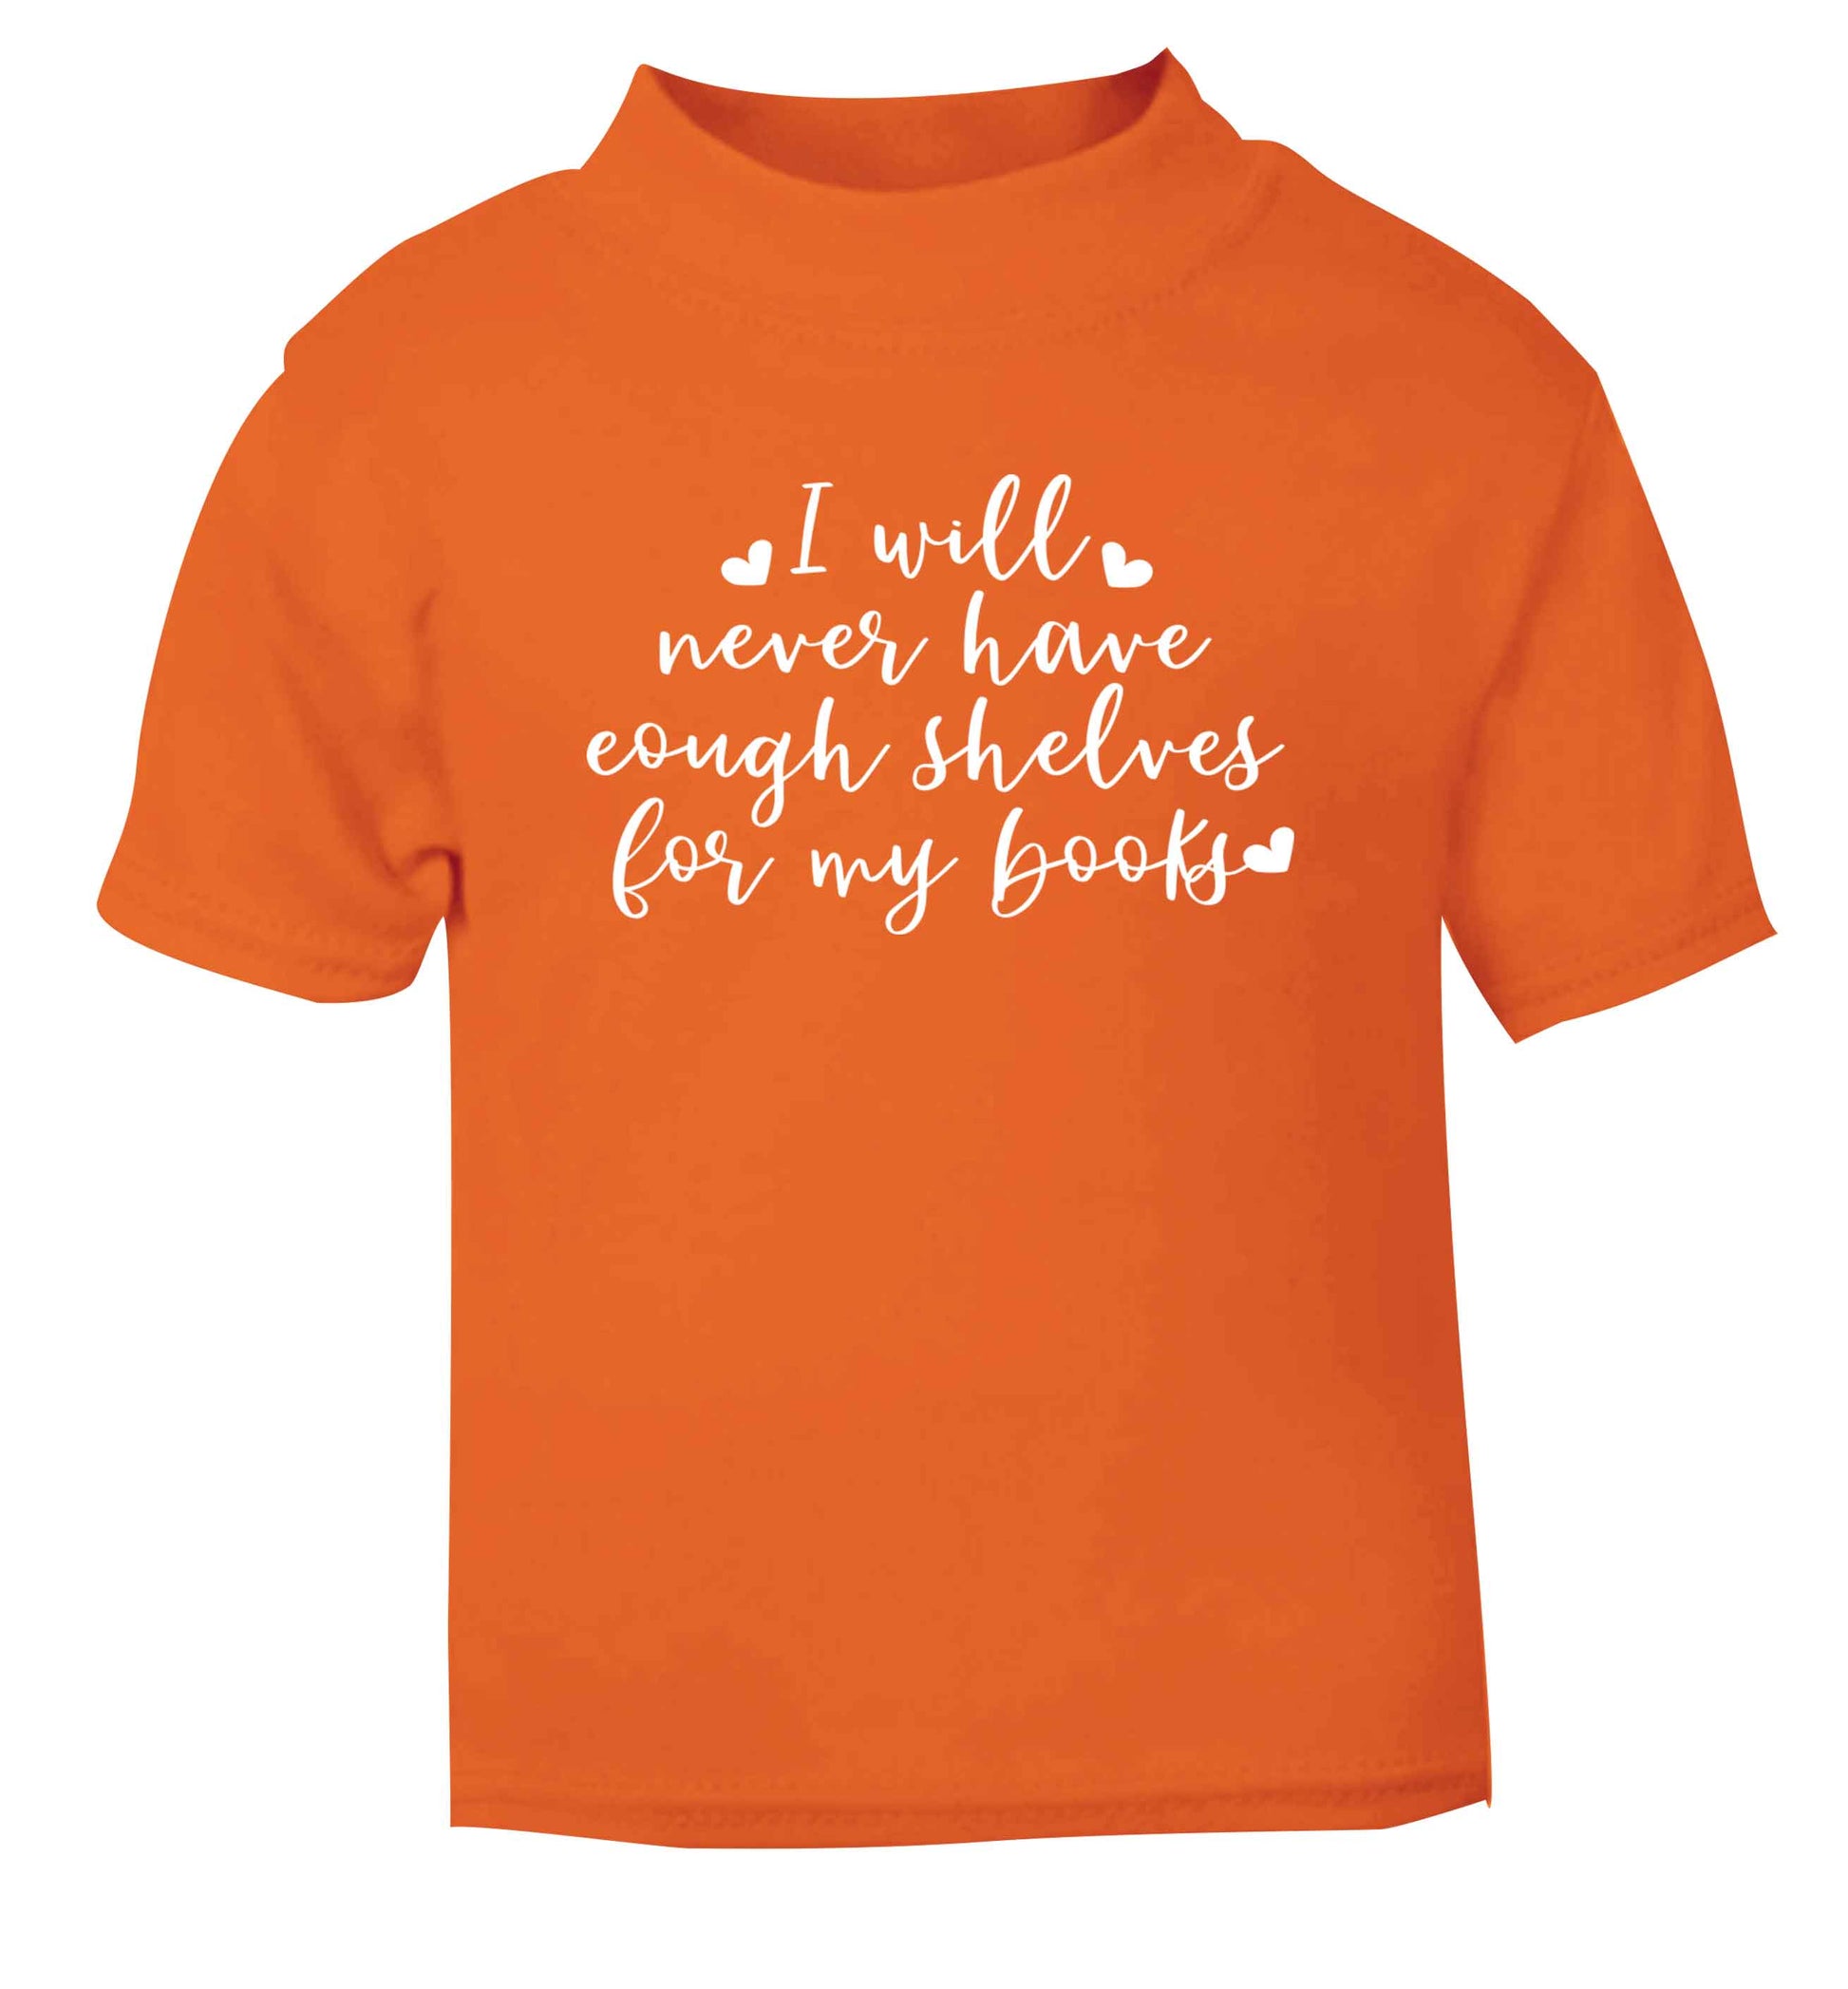 I will never have enough shelves for my books orange Baby Toddler Tshirt 2 Years